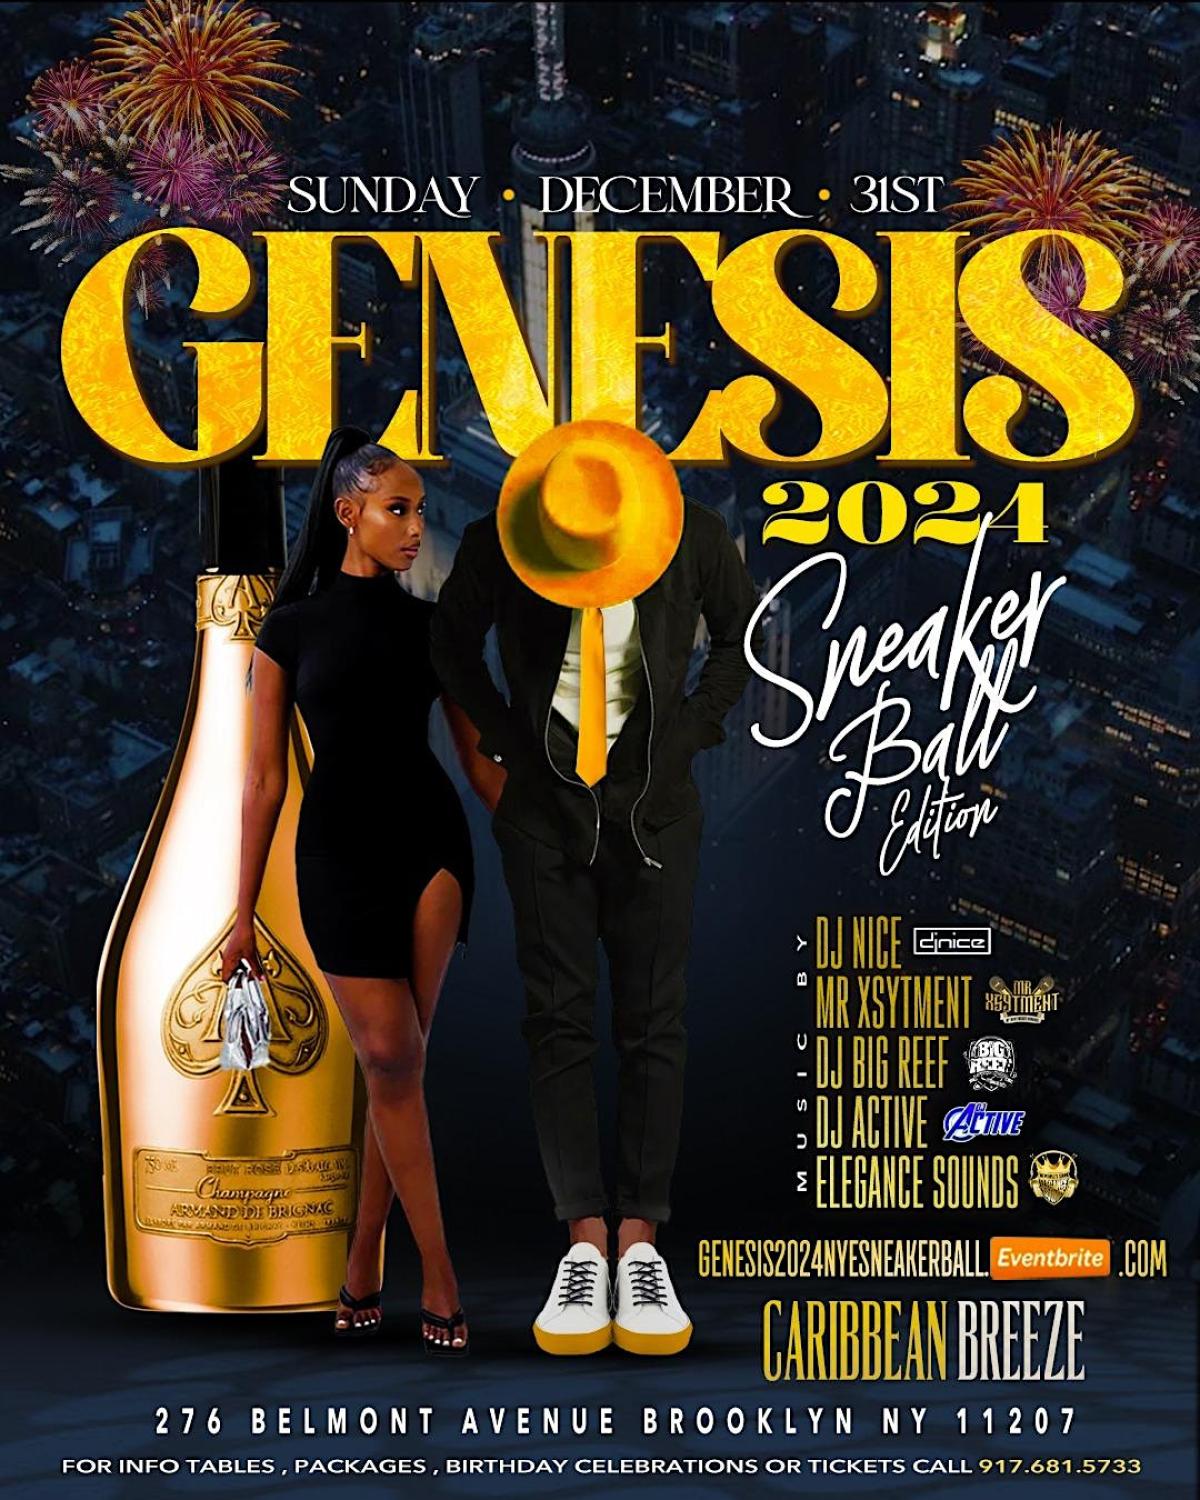 Genesis New Years Eve Sneaker Ball flyer or graphic.